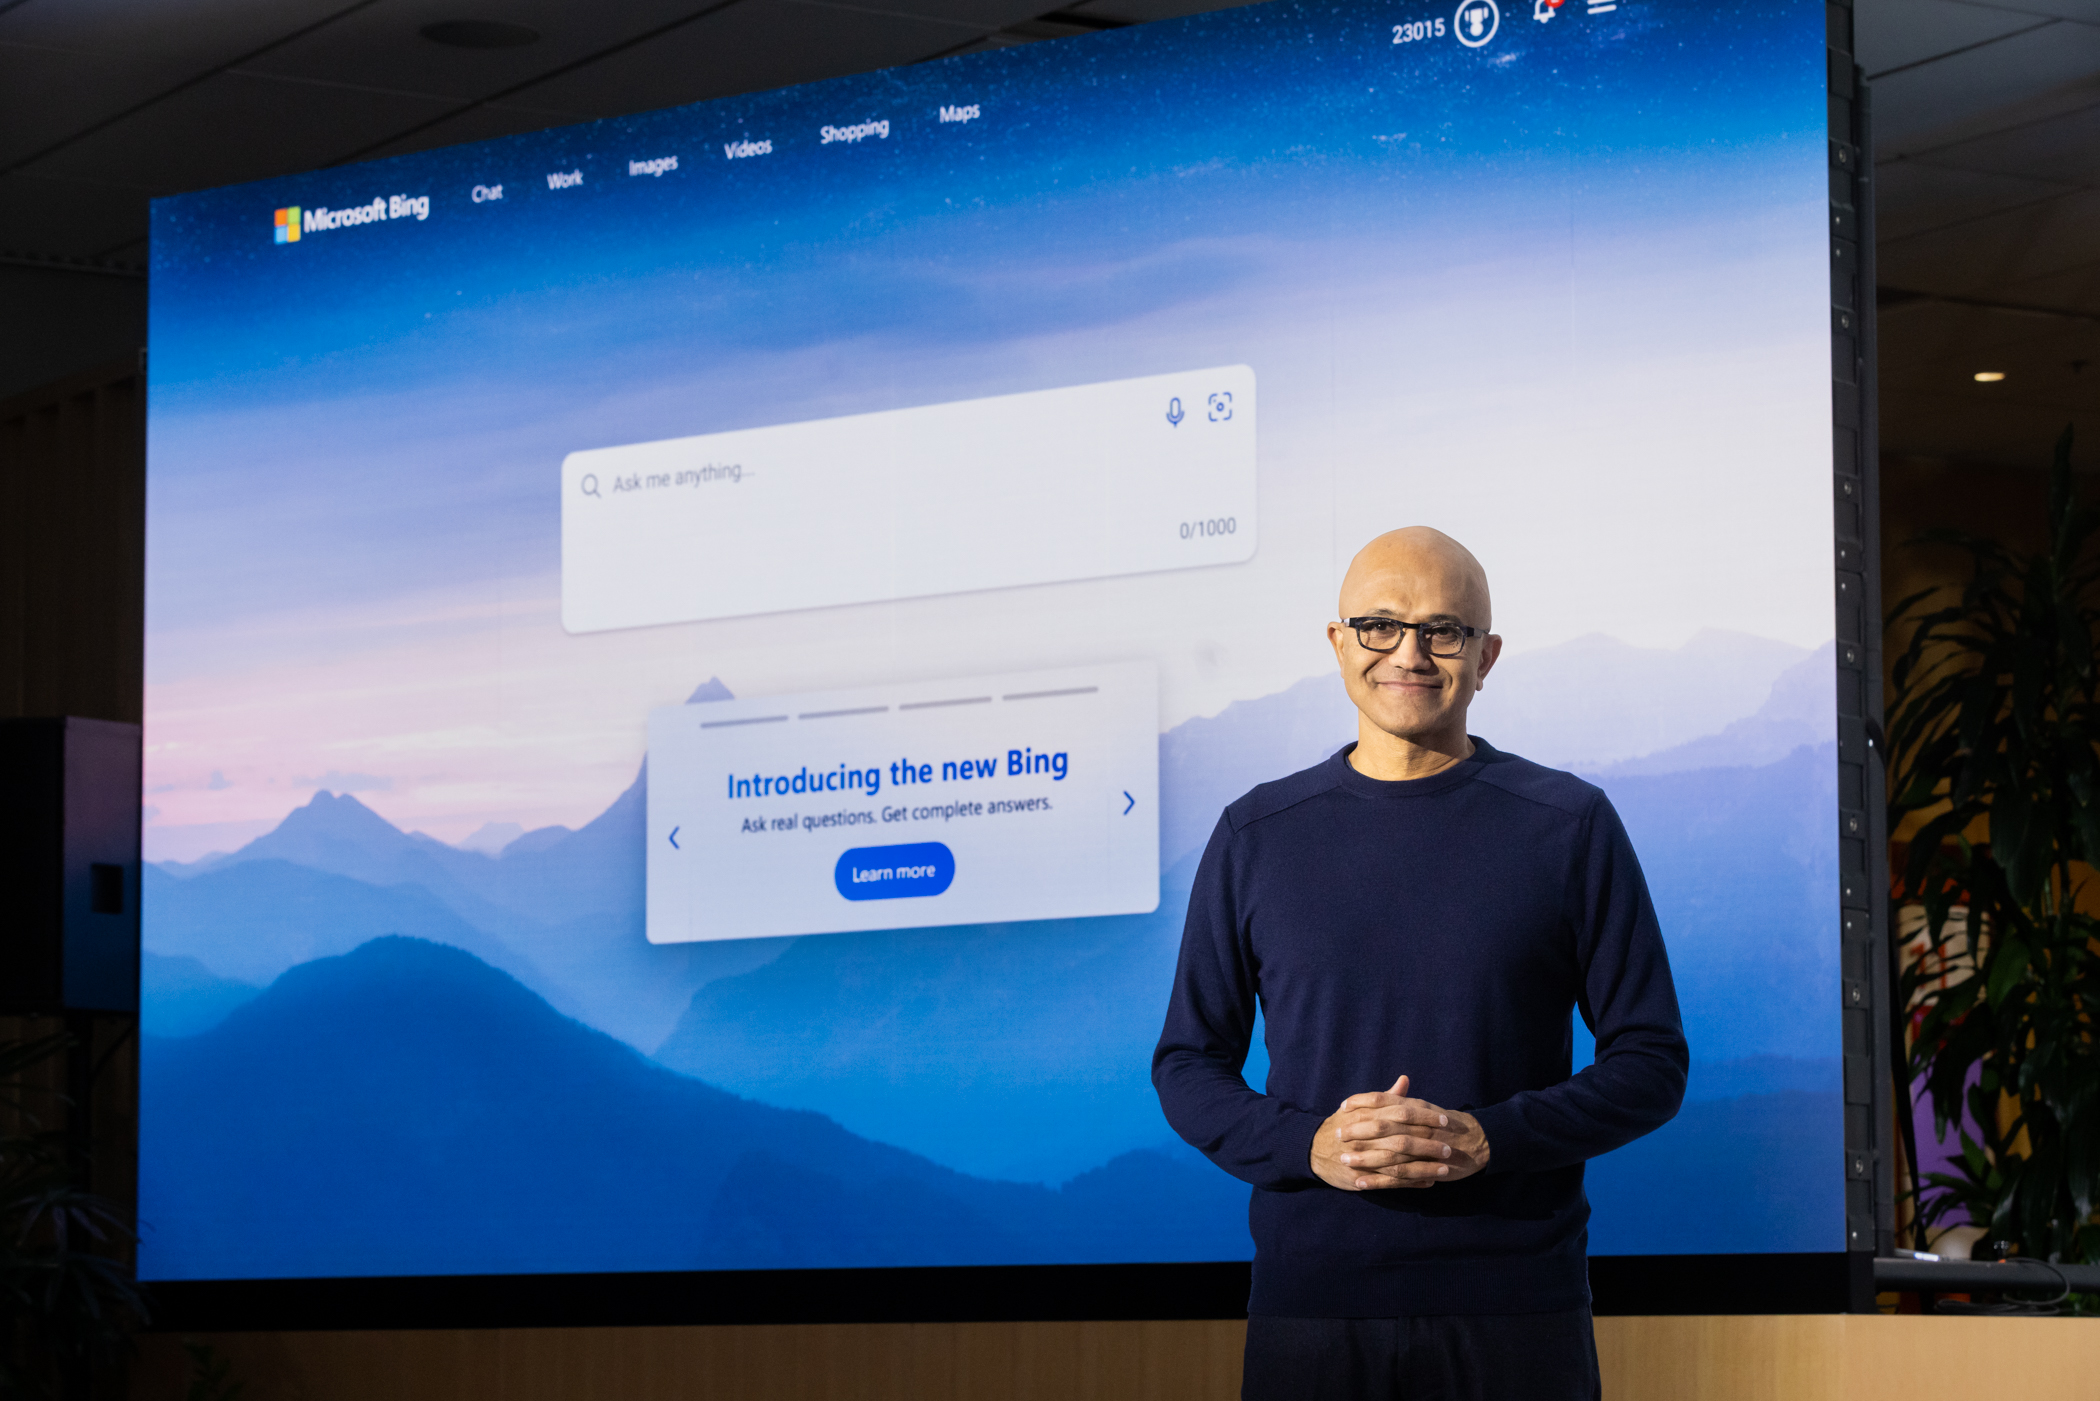 Microsoft chair and CEO Satya Nadella standing in front of a wall-sized screen displaying the new Bing search engine.